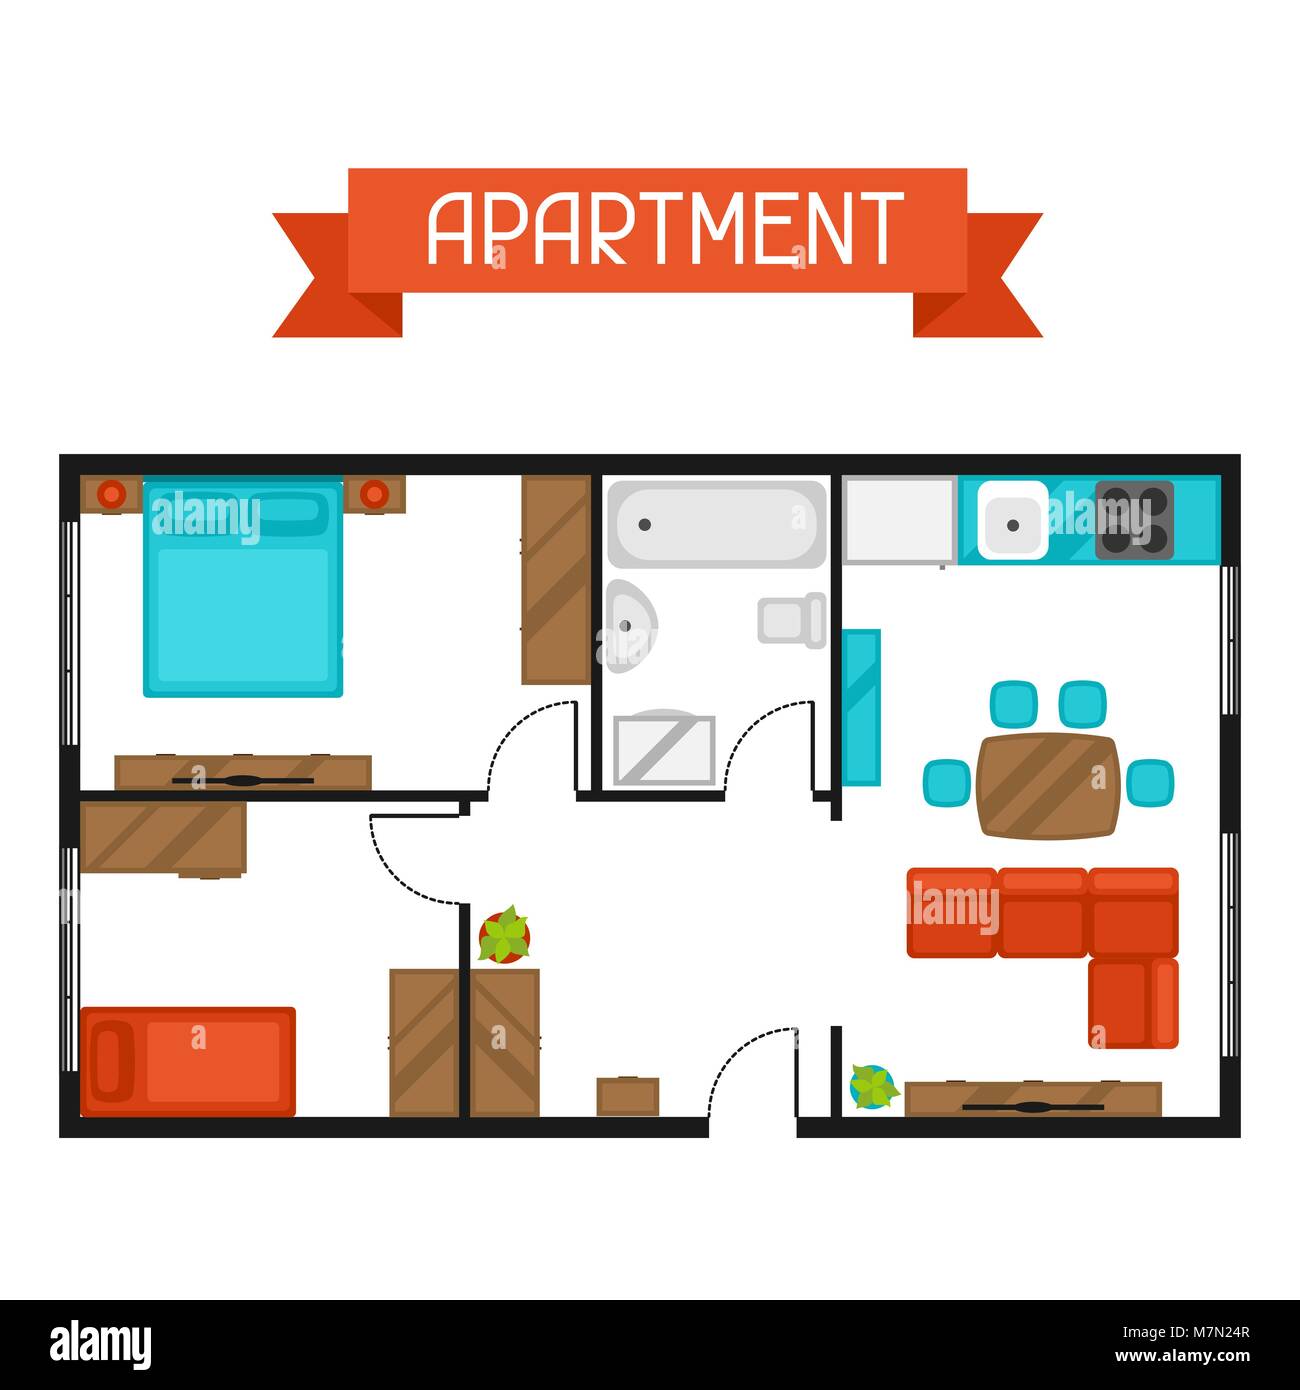 Architectural project of apartment with furniture. Image for banners, web sites, designs Stock Vector